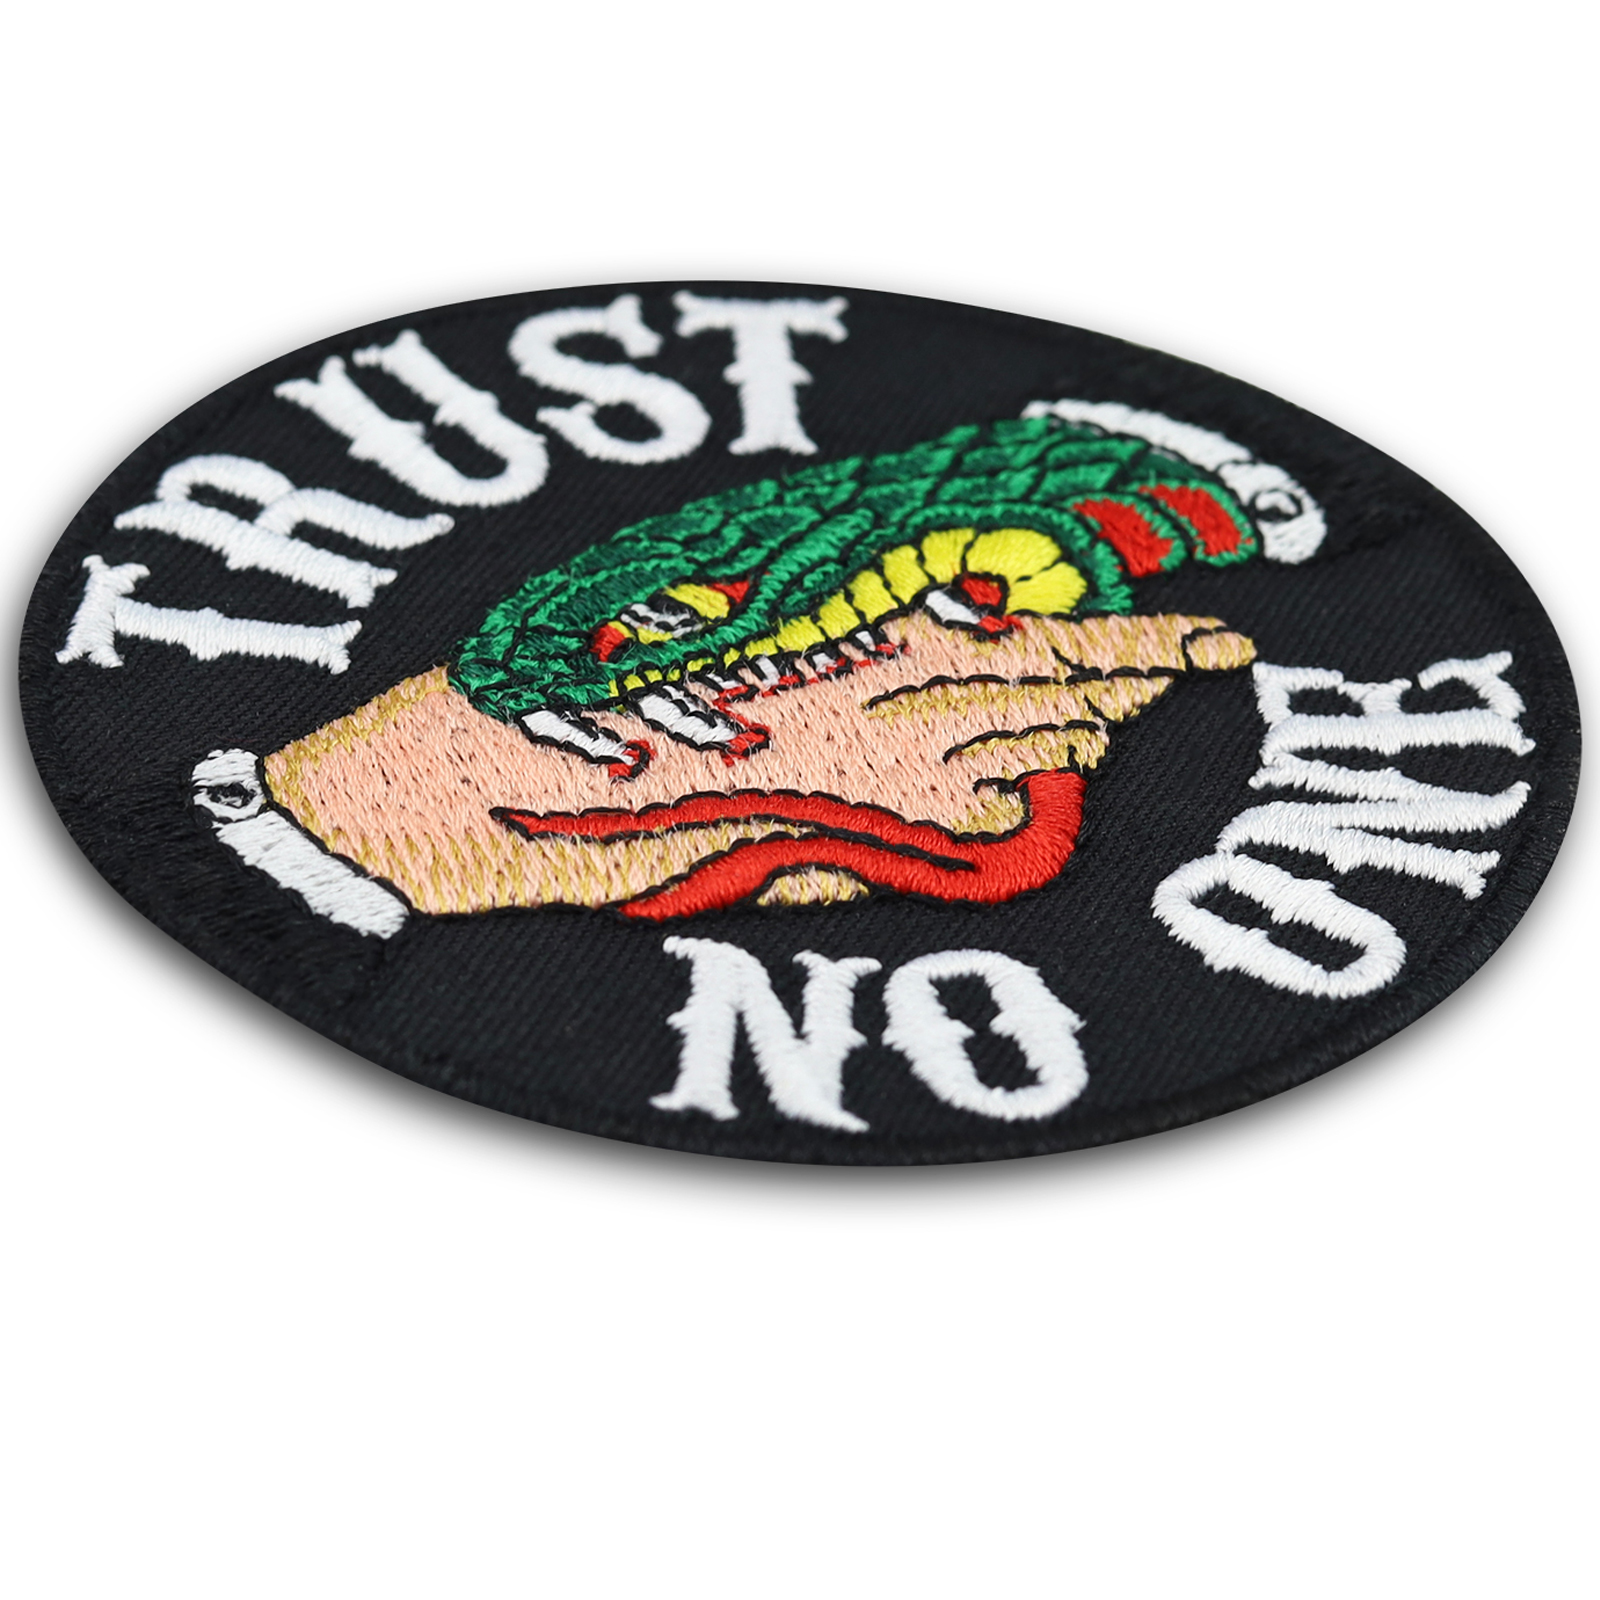 Trust no one - Patch